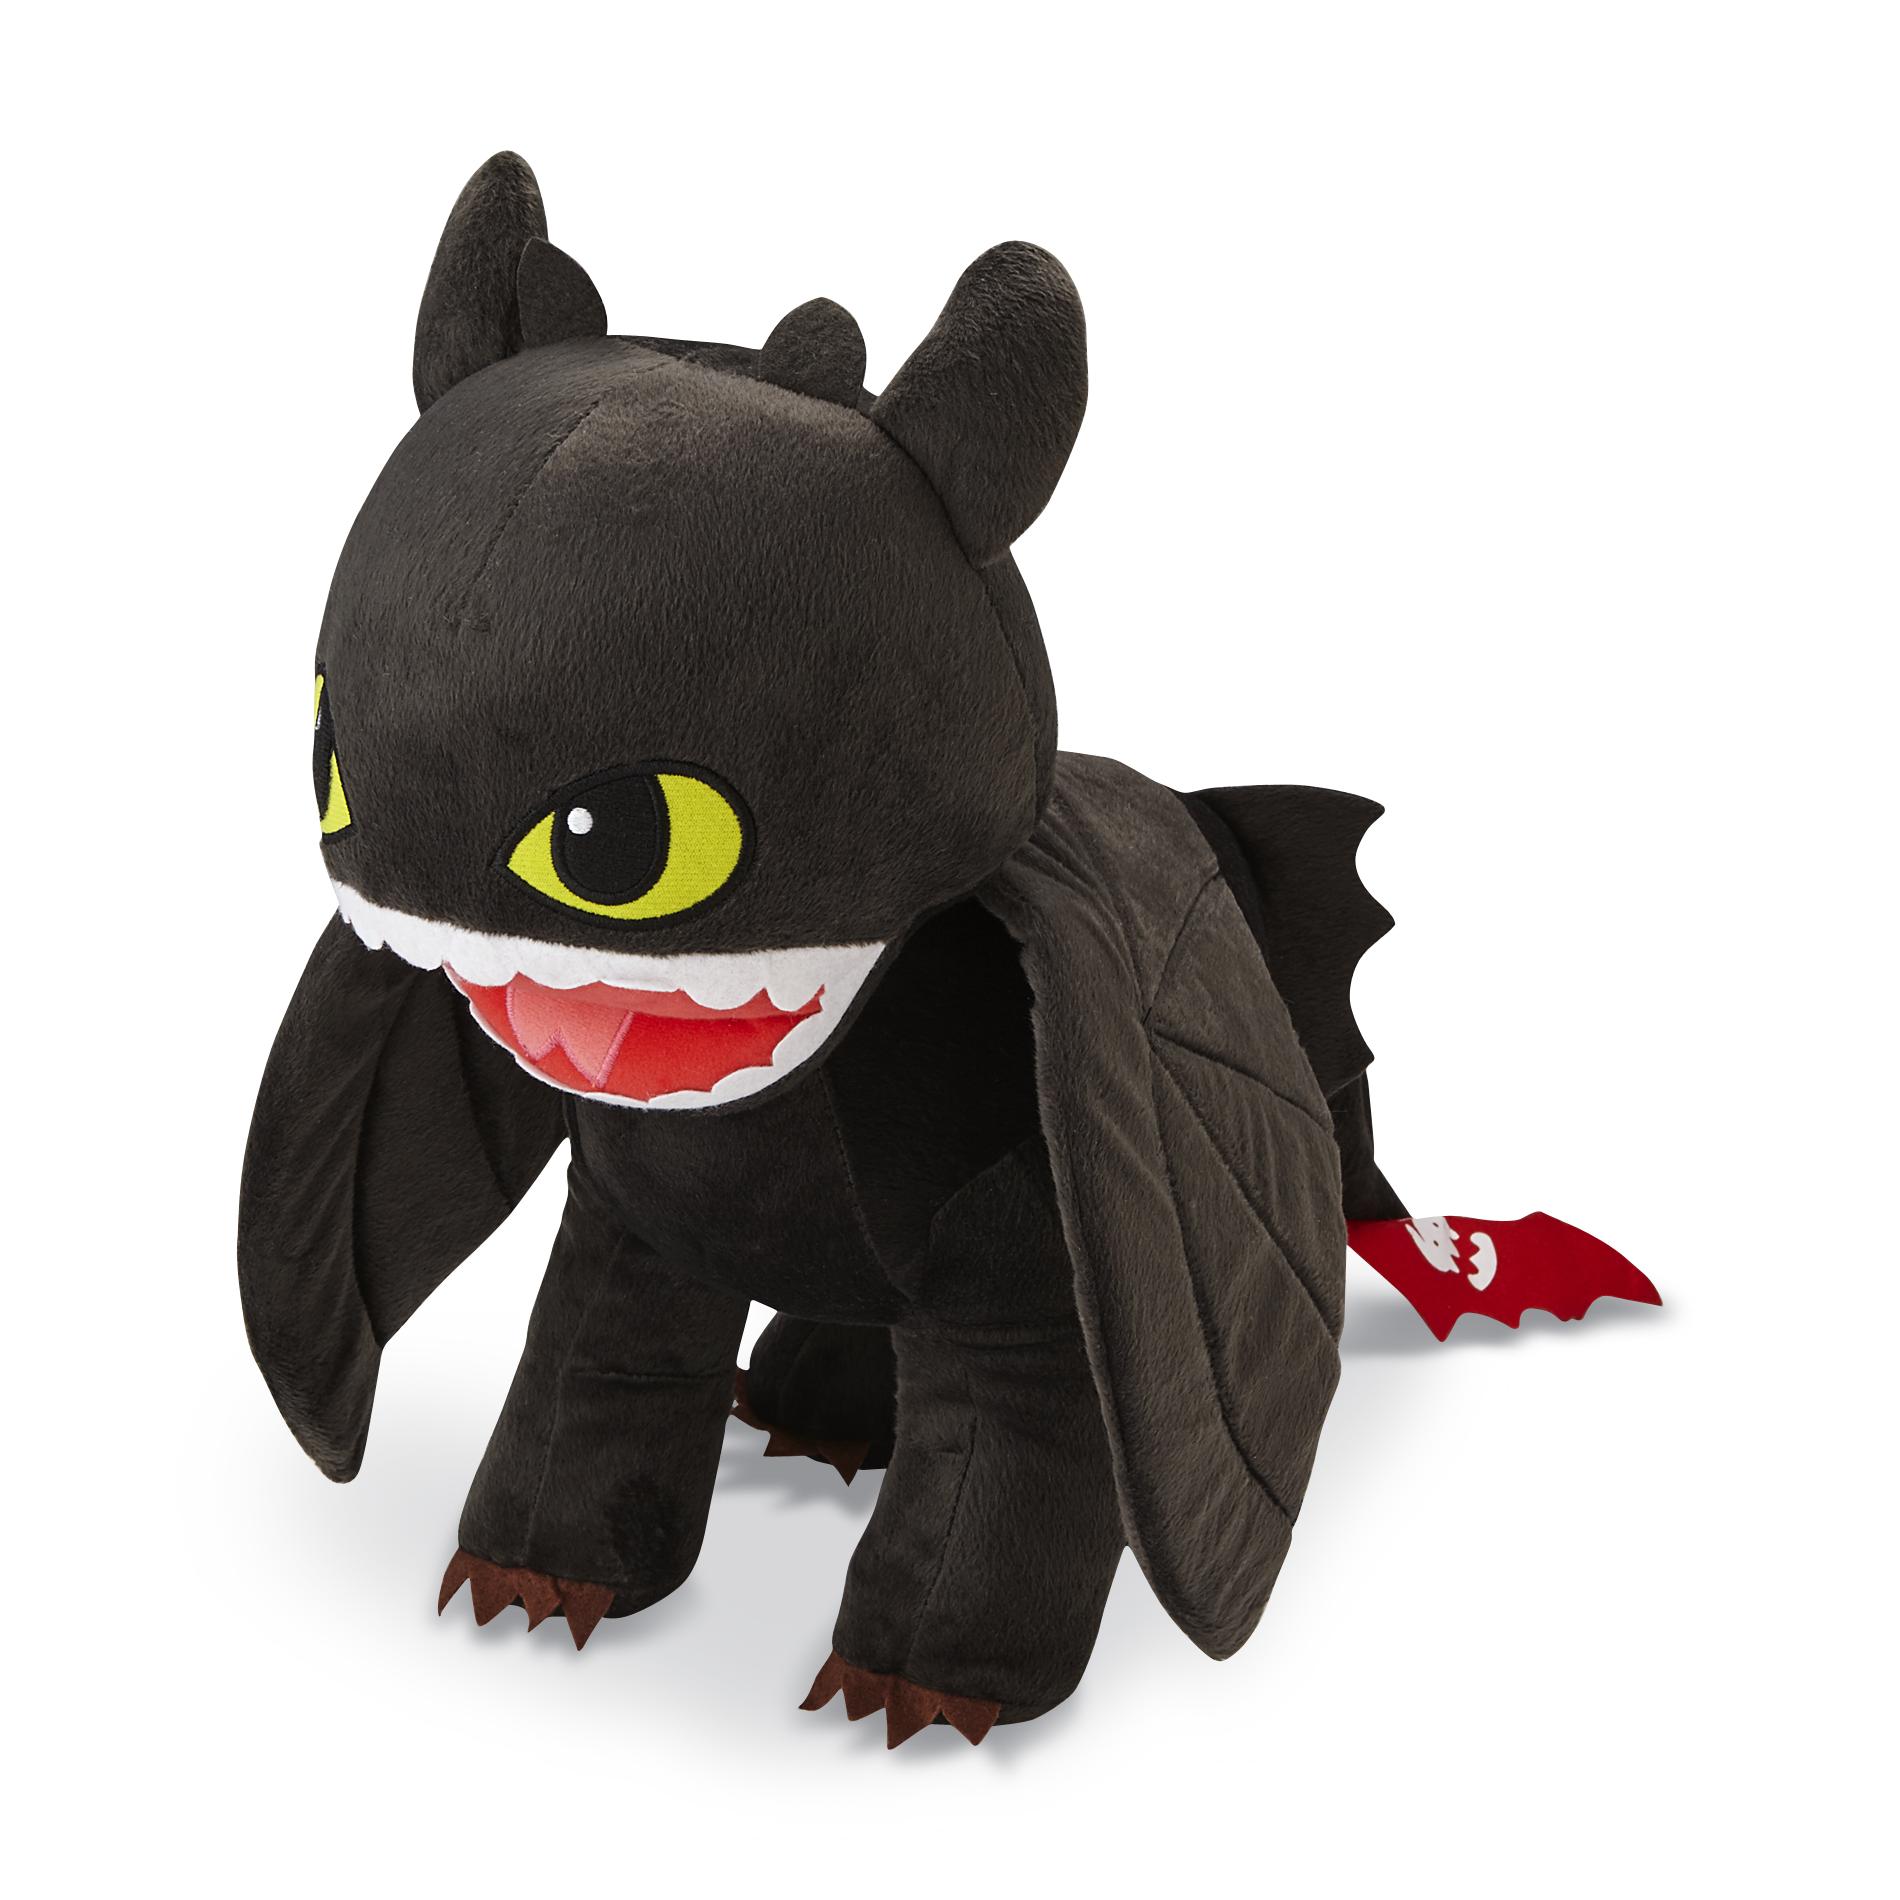 Dreamworks How To Train Your Dragon Plush Cuddle Pillow - Toothless